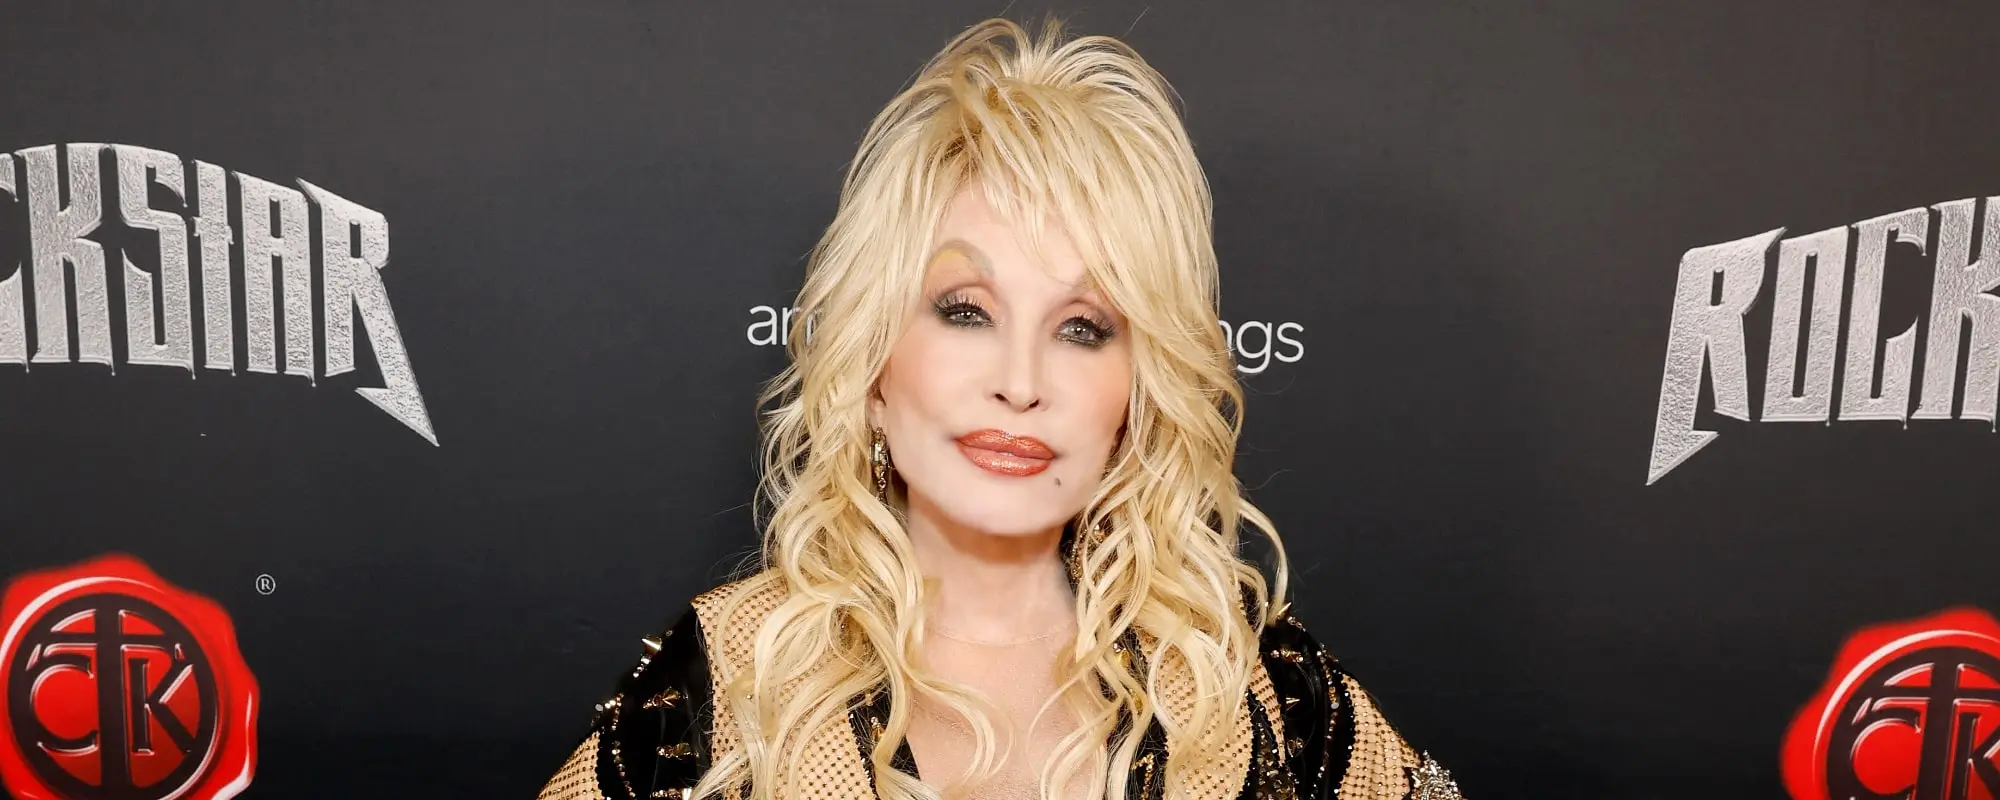 Dolly Parton Discusses Why “Jolene” Is So Popular: “There’s Always Someone More Beautiful Than You”